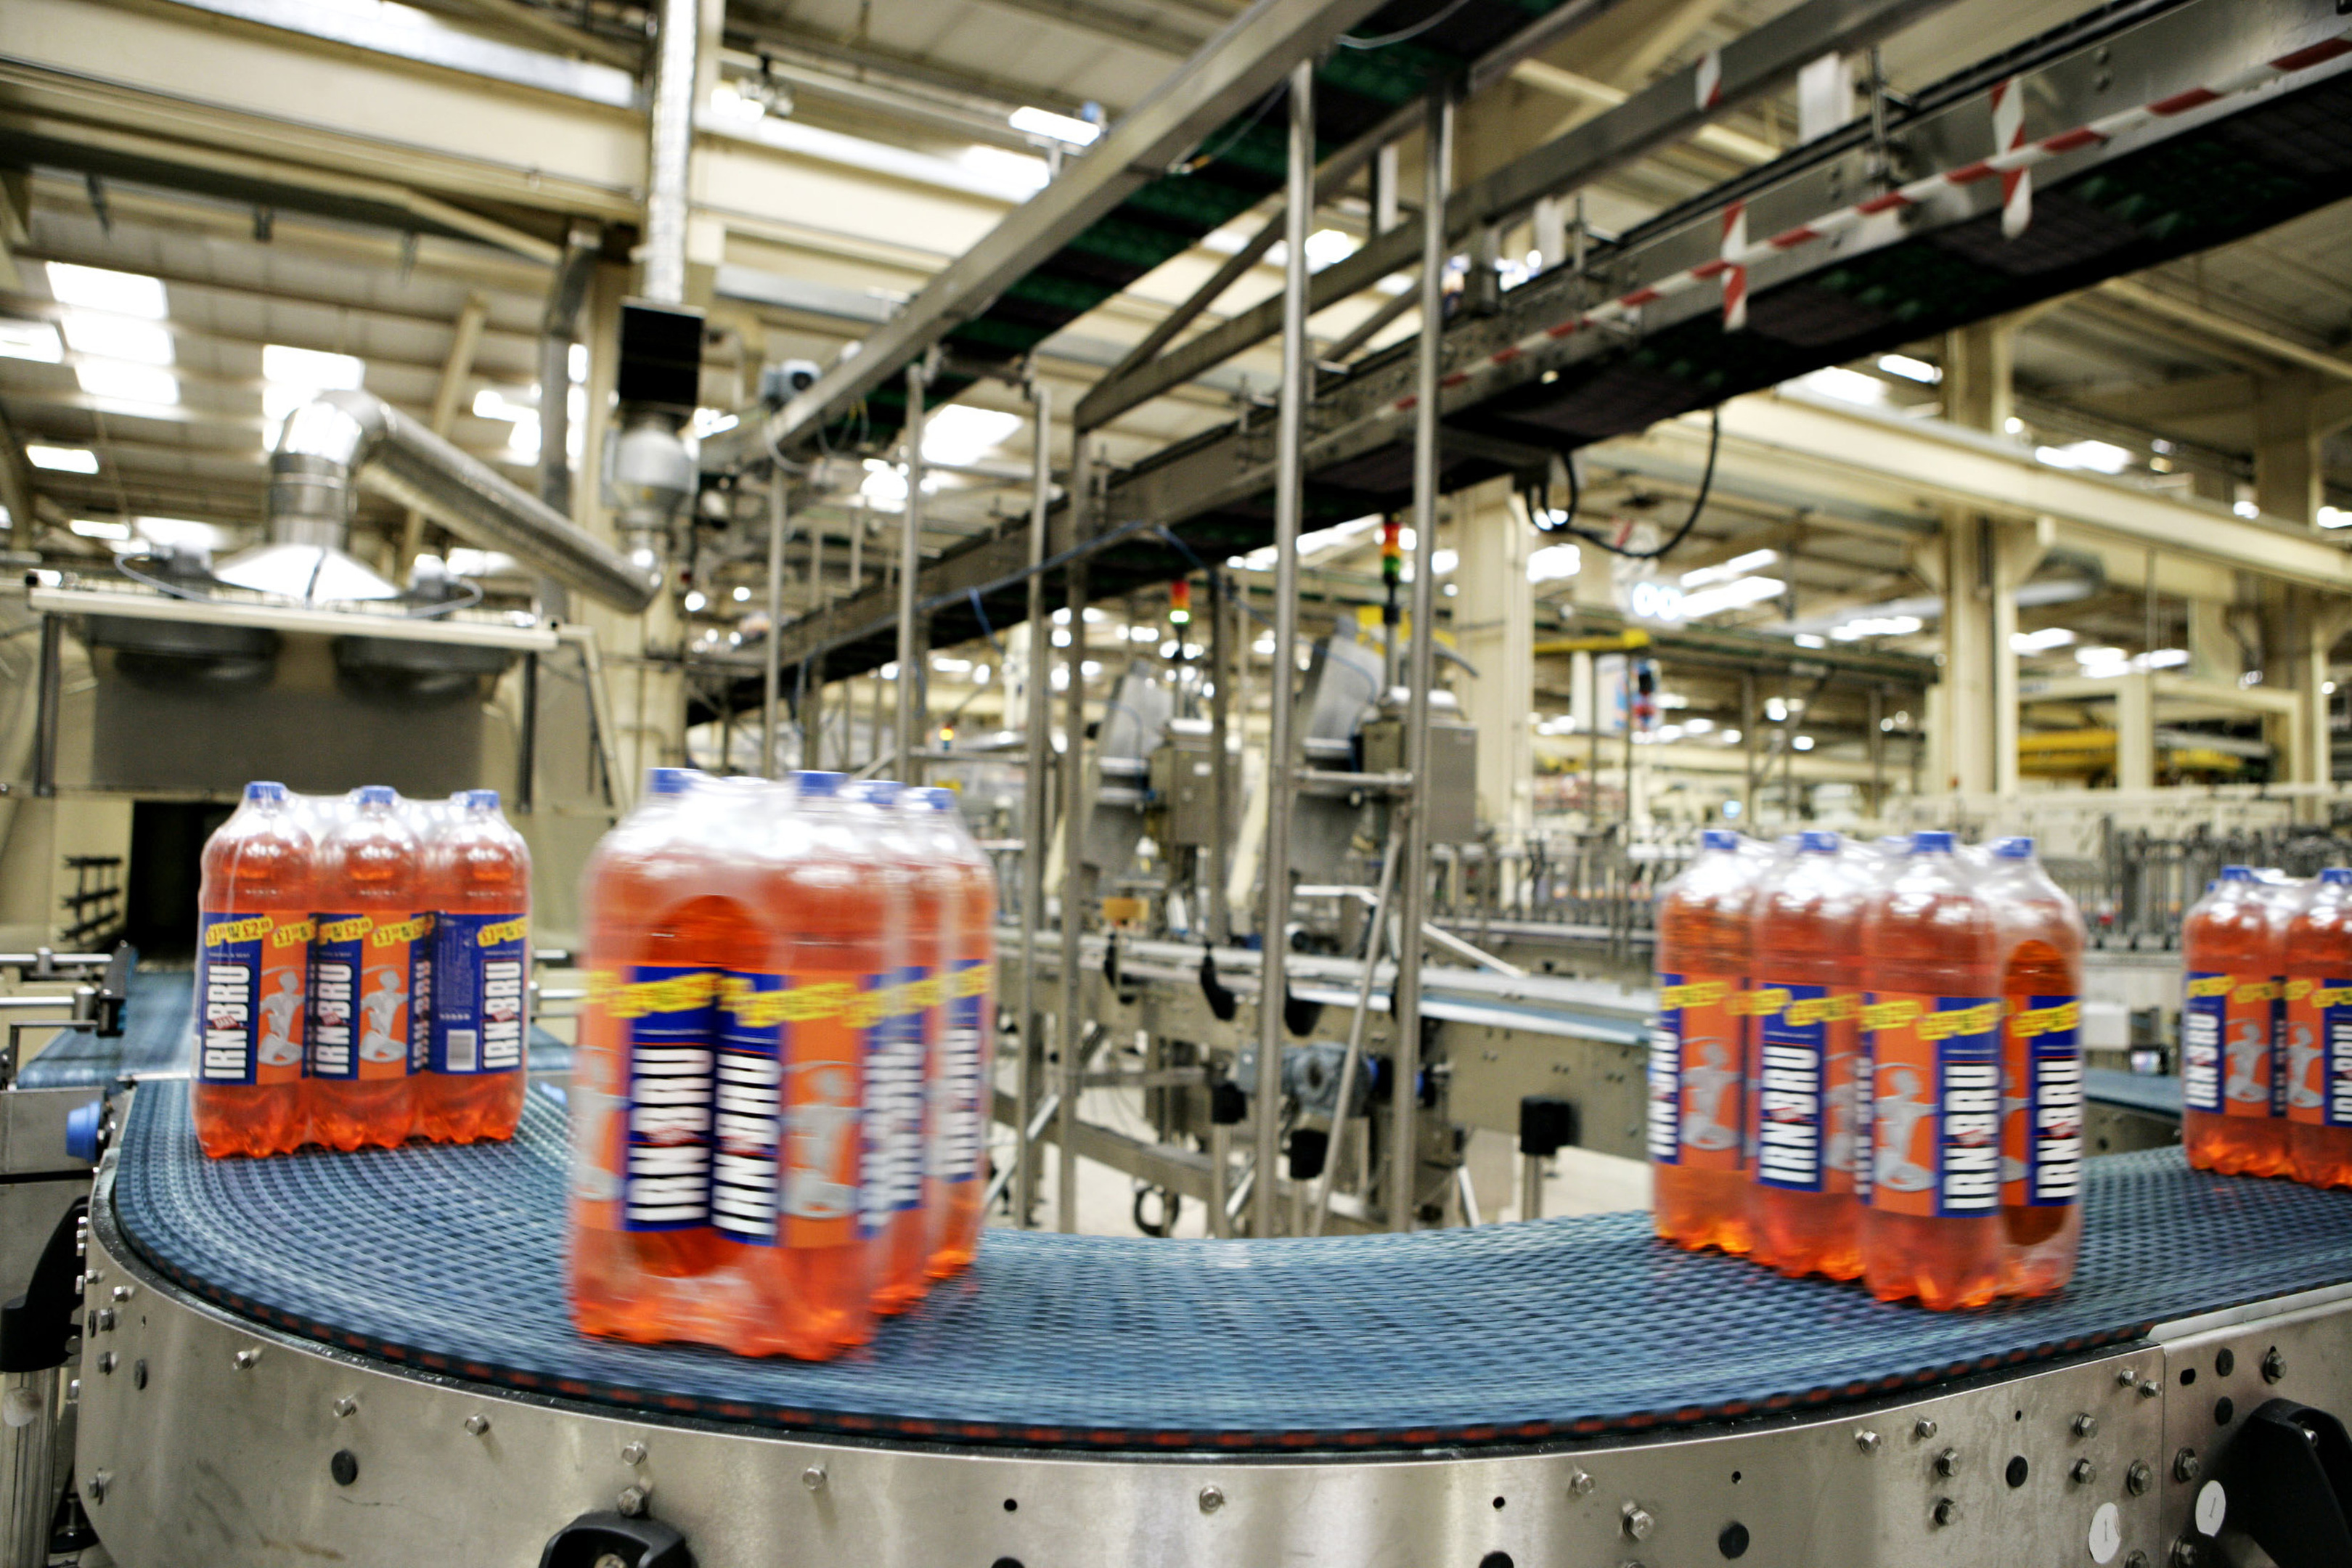 Irn-Bru has been toppled as top Scottish brand after years of market domination